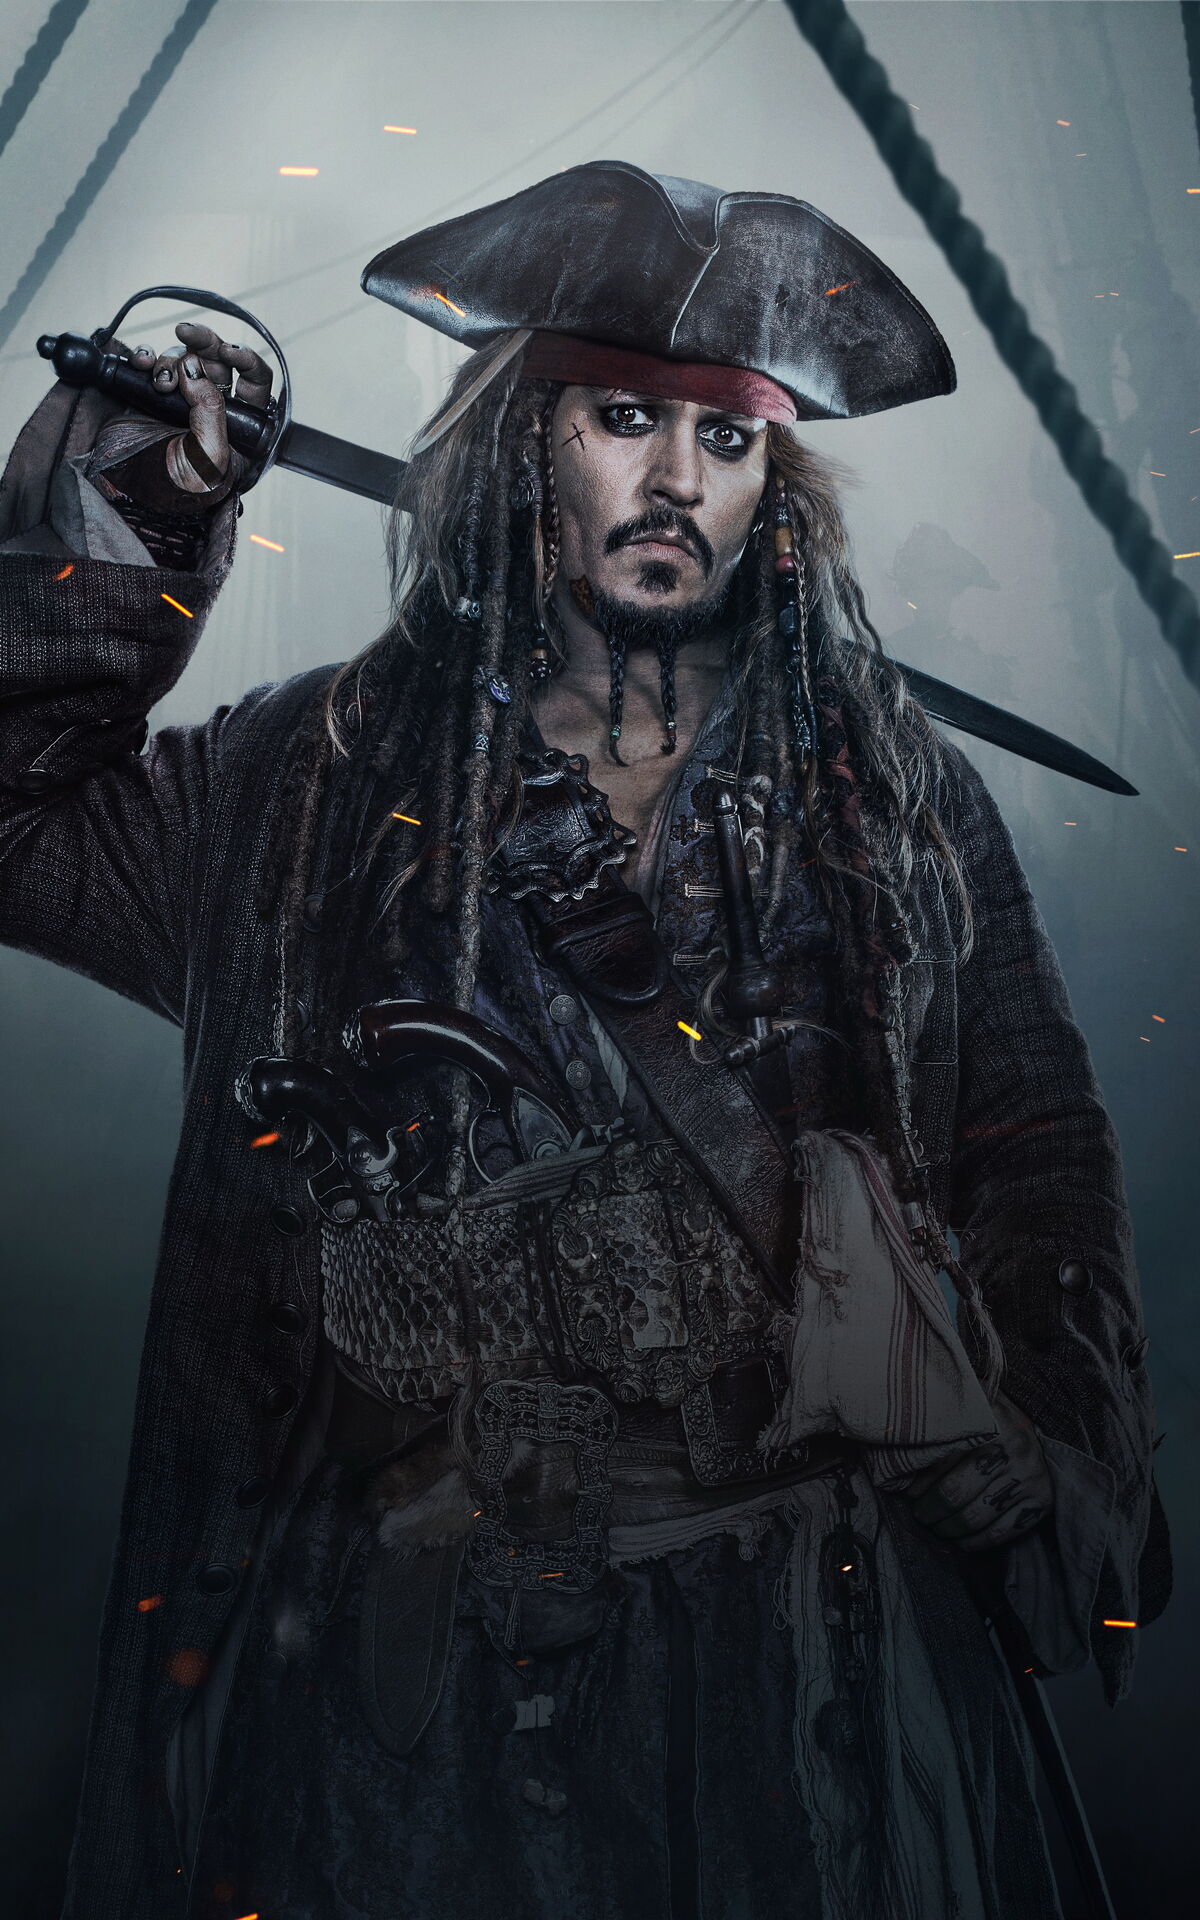 Captain Blood, Not Jack Sparrow: The Real Origin of Disney's